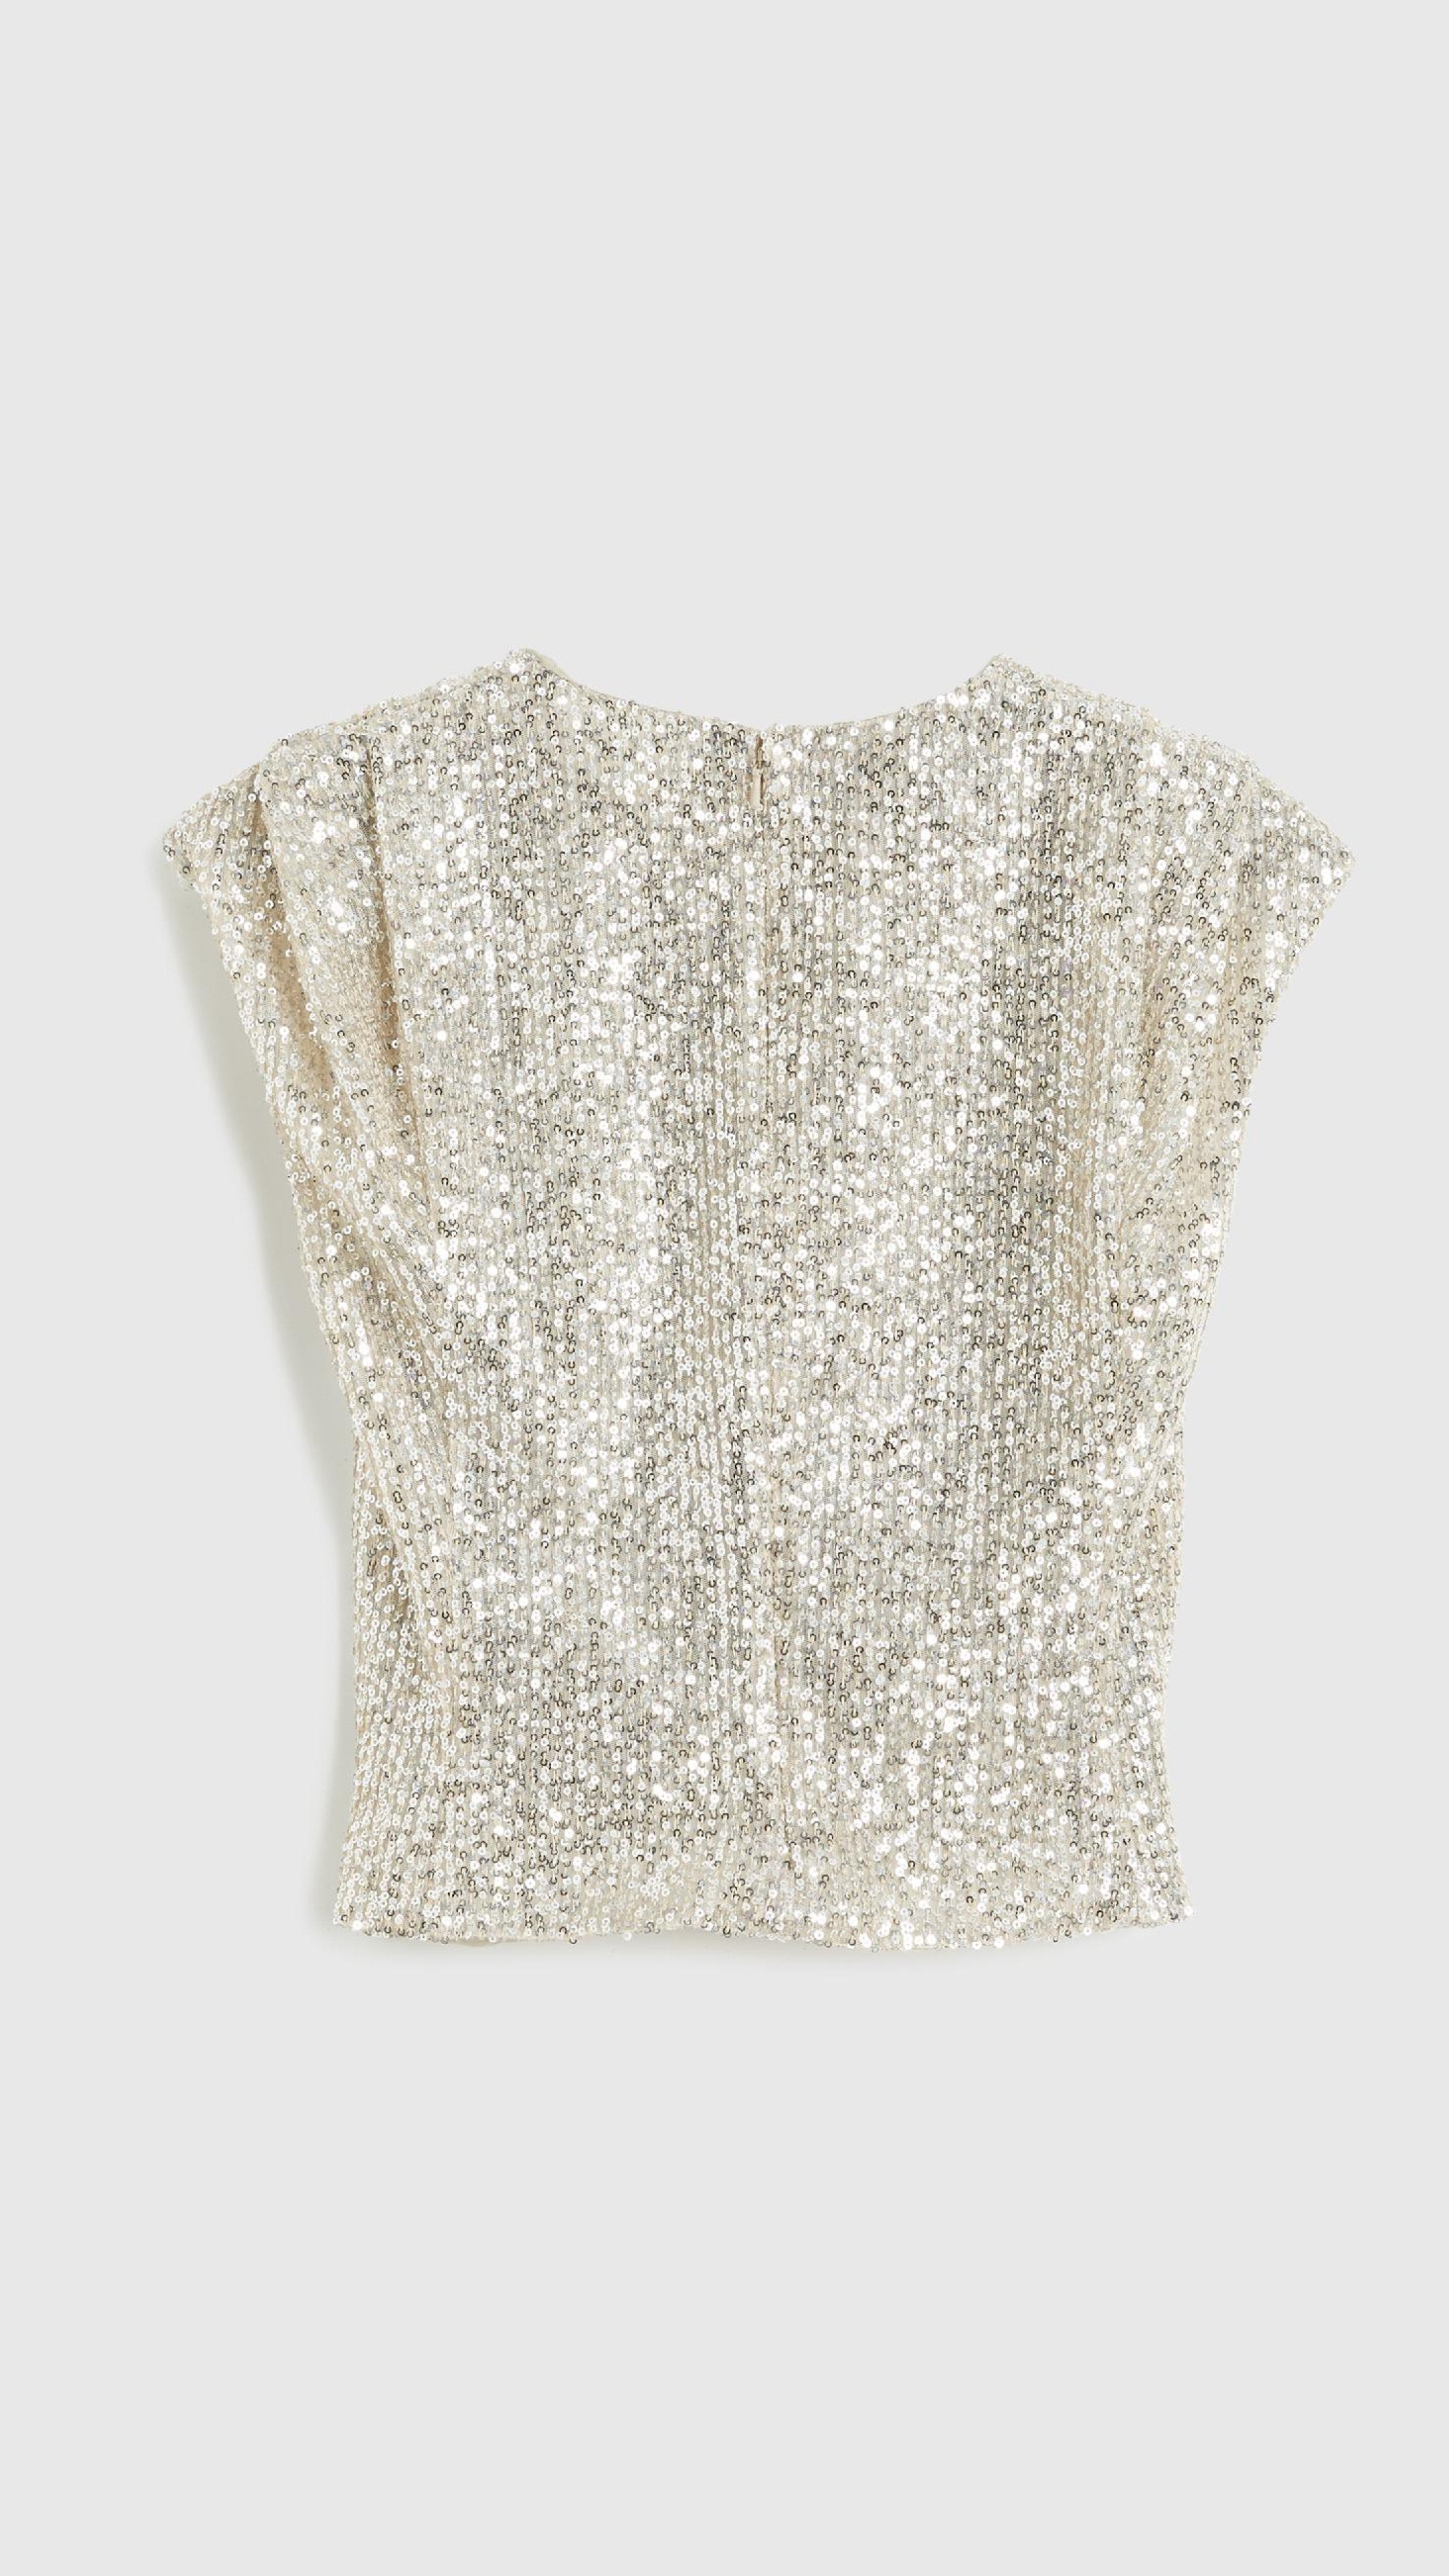 Rochas Paris Fashion Rounded Collar Sparkle Top Fitted Sleeveless Blouse with pleated shoulders in a silver sequins. Product photo shown back view.